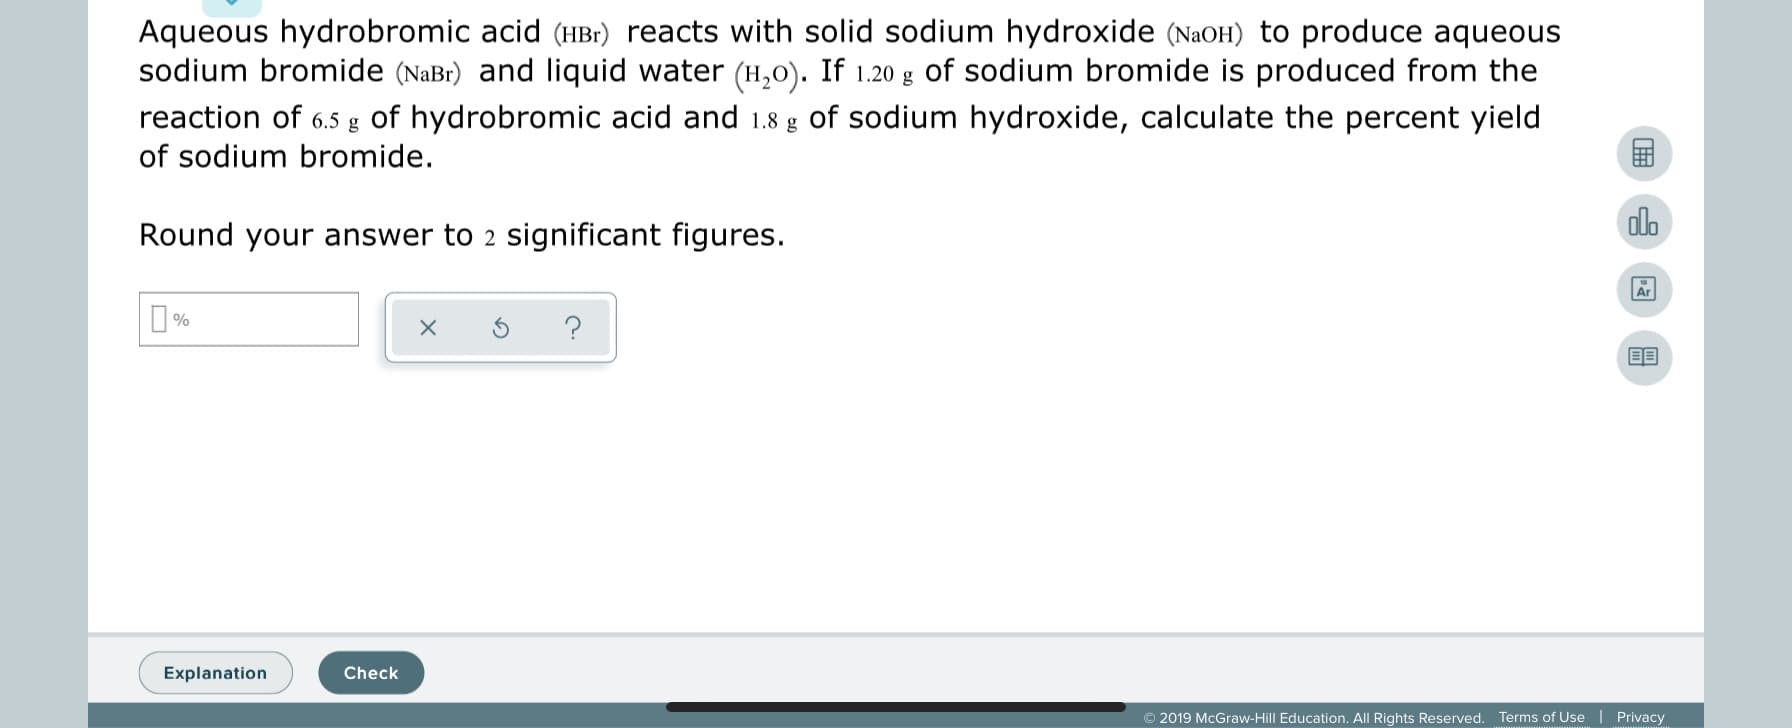 Aqueous hydrobromic acid (HBr) reacts with solid sodium hydroxide (NaOH) to produce aqueous
sodium bromide (NaBr) and liquid water (H,0). If 1.20 g of sodium bromide is produced from the
reaction of 6.5 g of hydrobromic acid and 1.8 g of sodium hydroxide, calculate the percent yield
of sodium bromide.
olo
Round your answer to 2 significant figures.
O%
Explanation
Check
© 2019 McGraw-Hill Education. All Rights Reserved.
Privacy
Terms of Use
